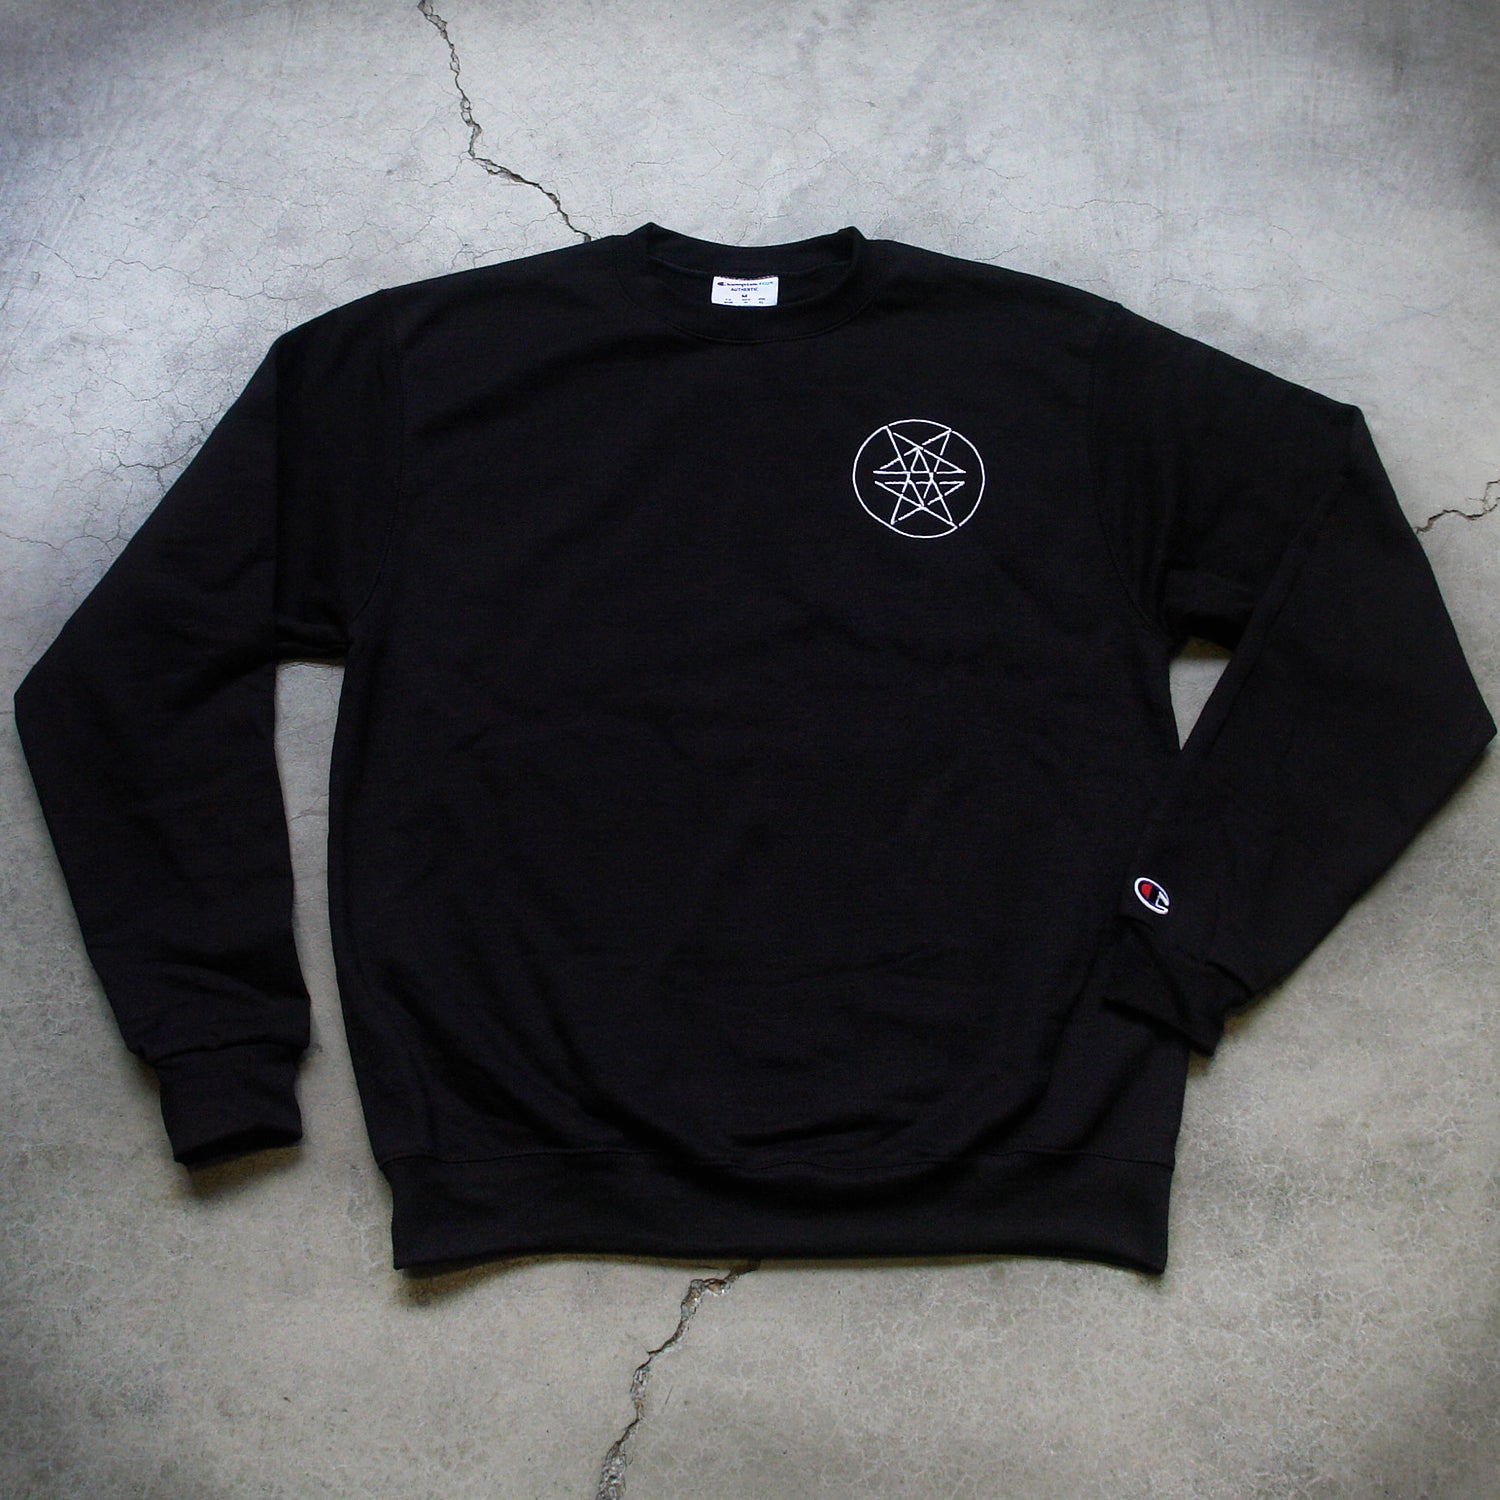 Image of the front of a black crewneck against a grey concrete background. The left chest has what is called a double pentagram, it is a white circle with two stars mirroring and slightly overlapping each other on the inside of the circle. The left sleeve has the champion 